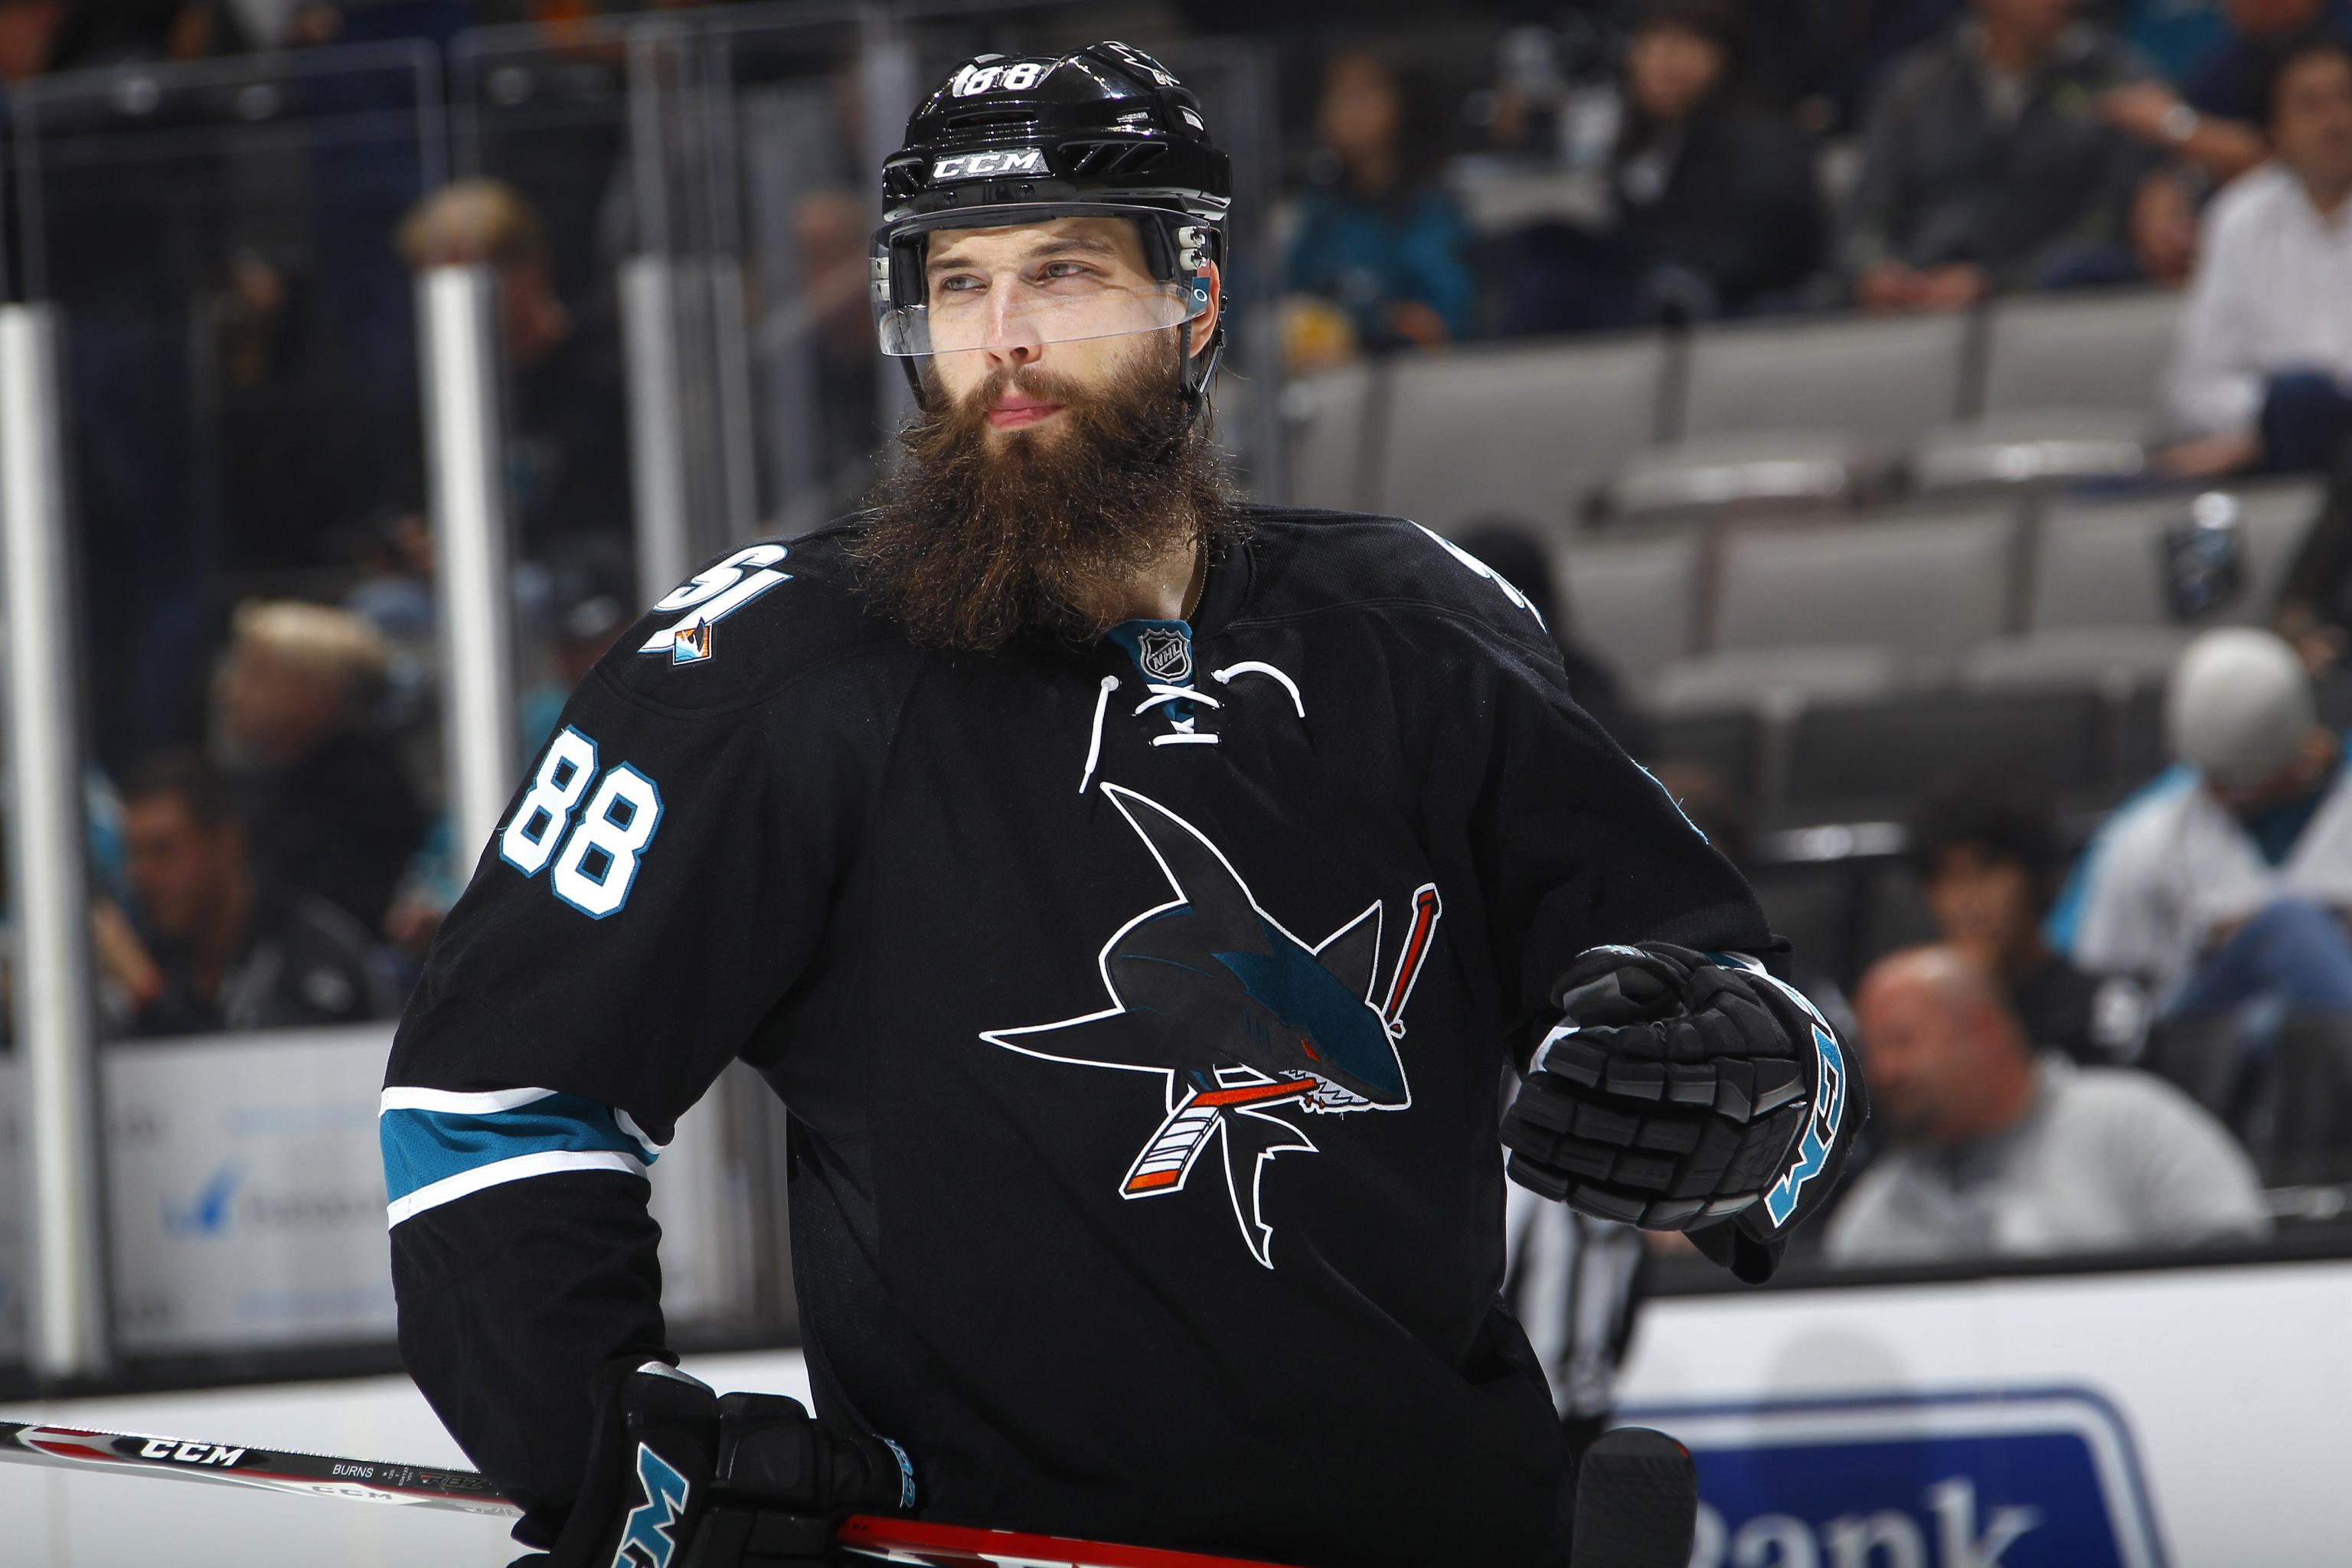 San Jose Sharks - This face says it all! Vote Brent Burns